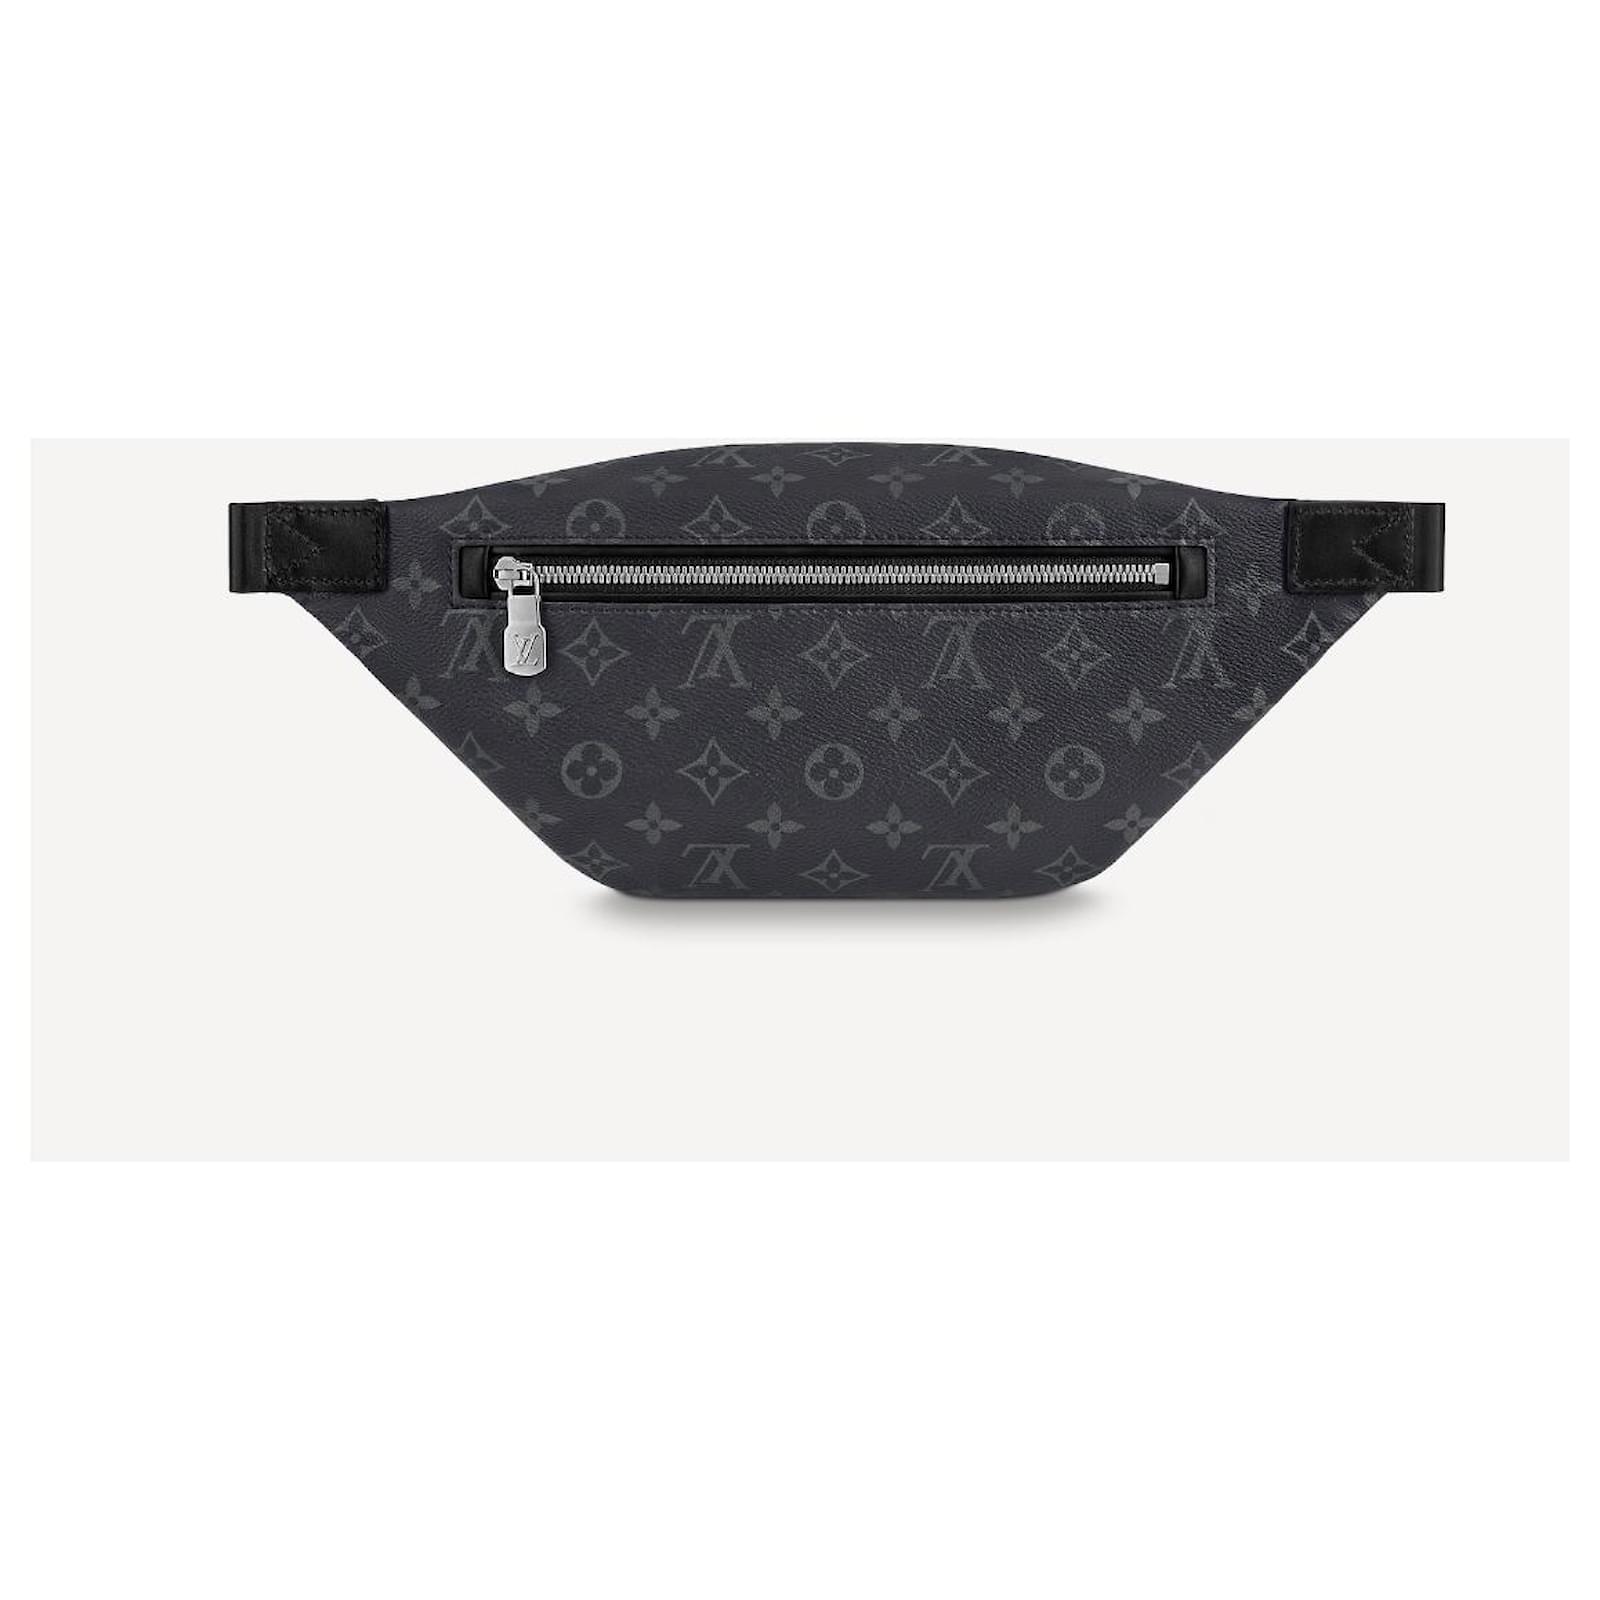 AUTH LOUIS VUITTON DISCOVERY BUMBAG PM M46108 LEATHER GRAY W40